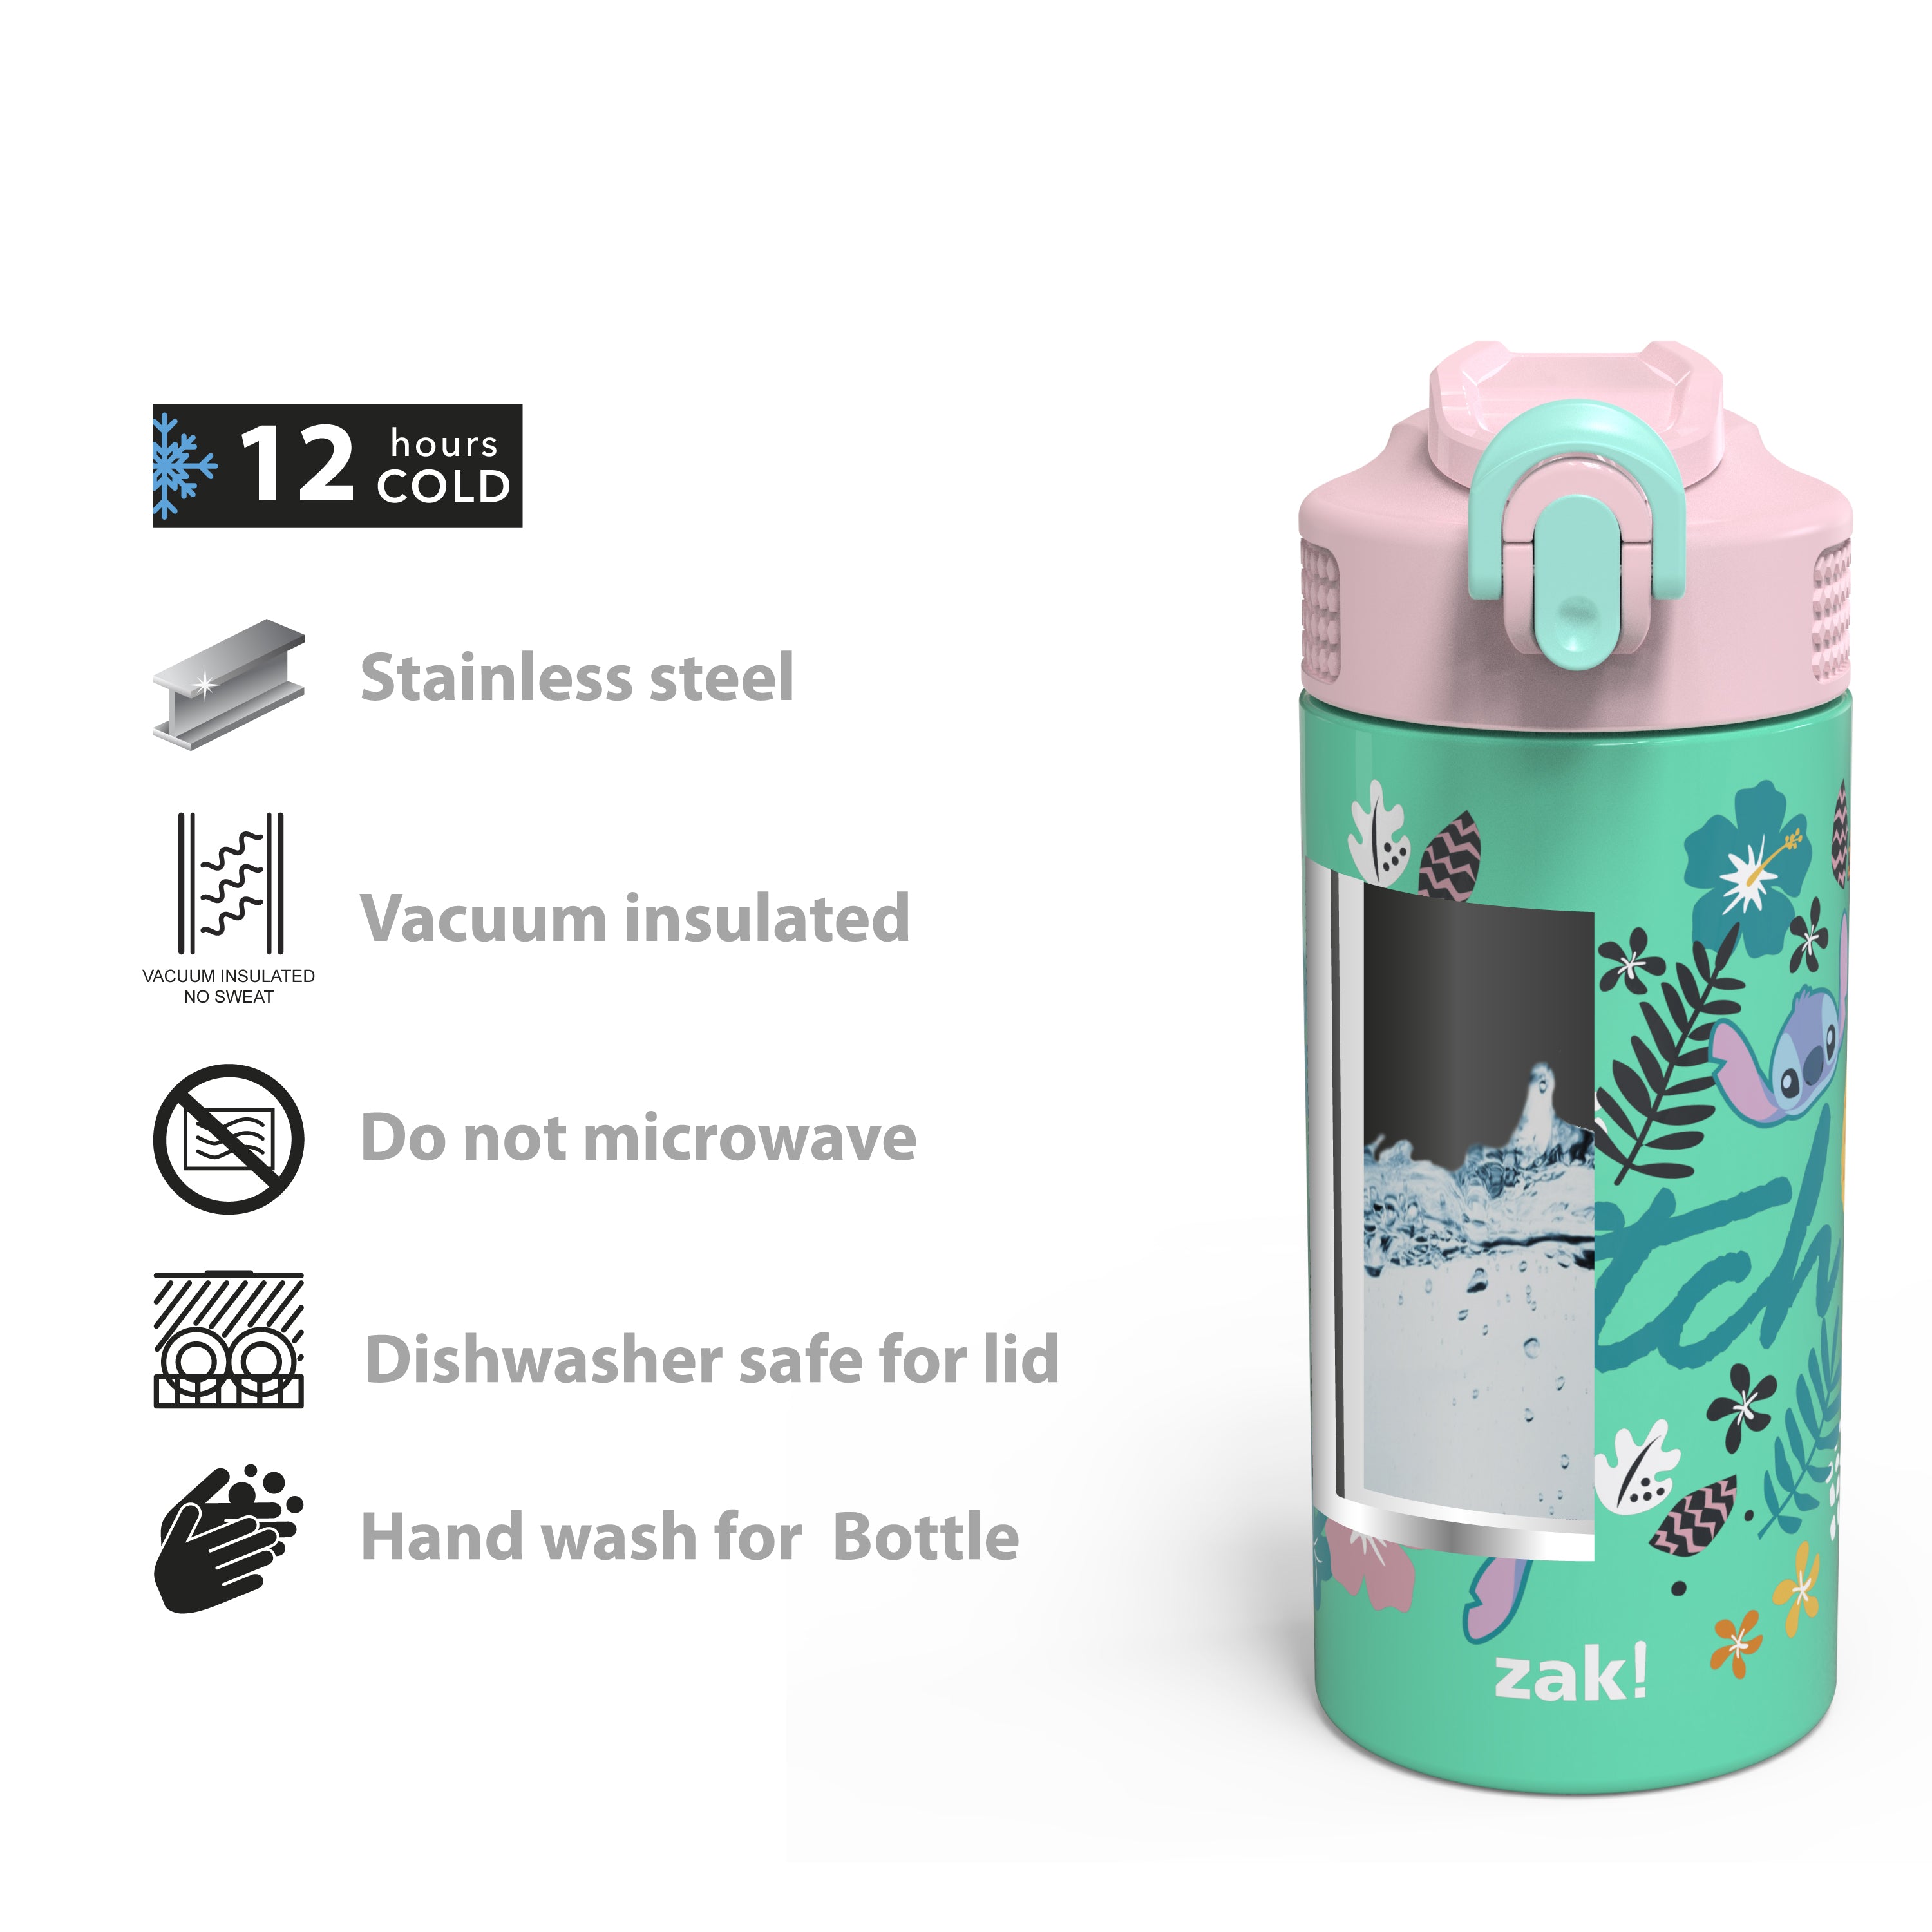 Disney Lilo &amp; Stitch Kids Stainless Steel Leak Proof Water Bottle with Push Button Lid and Spout